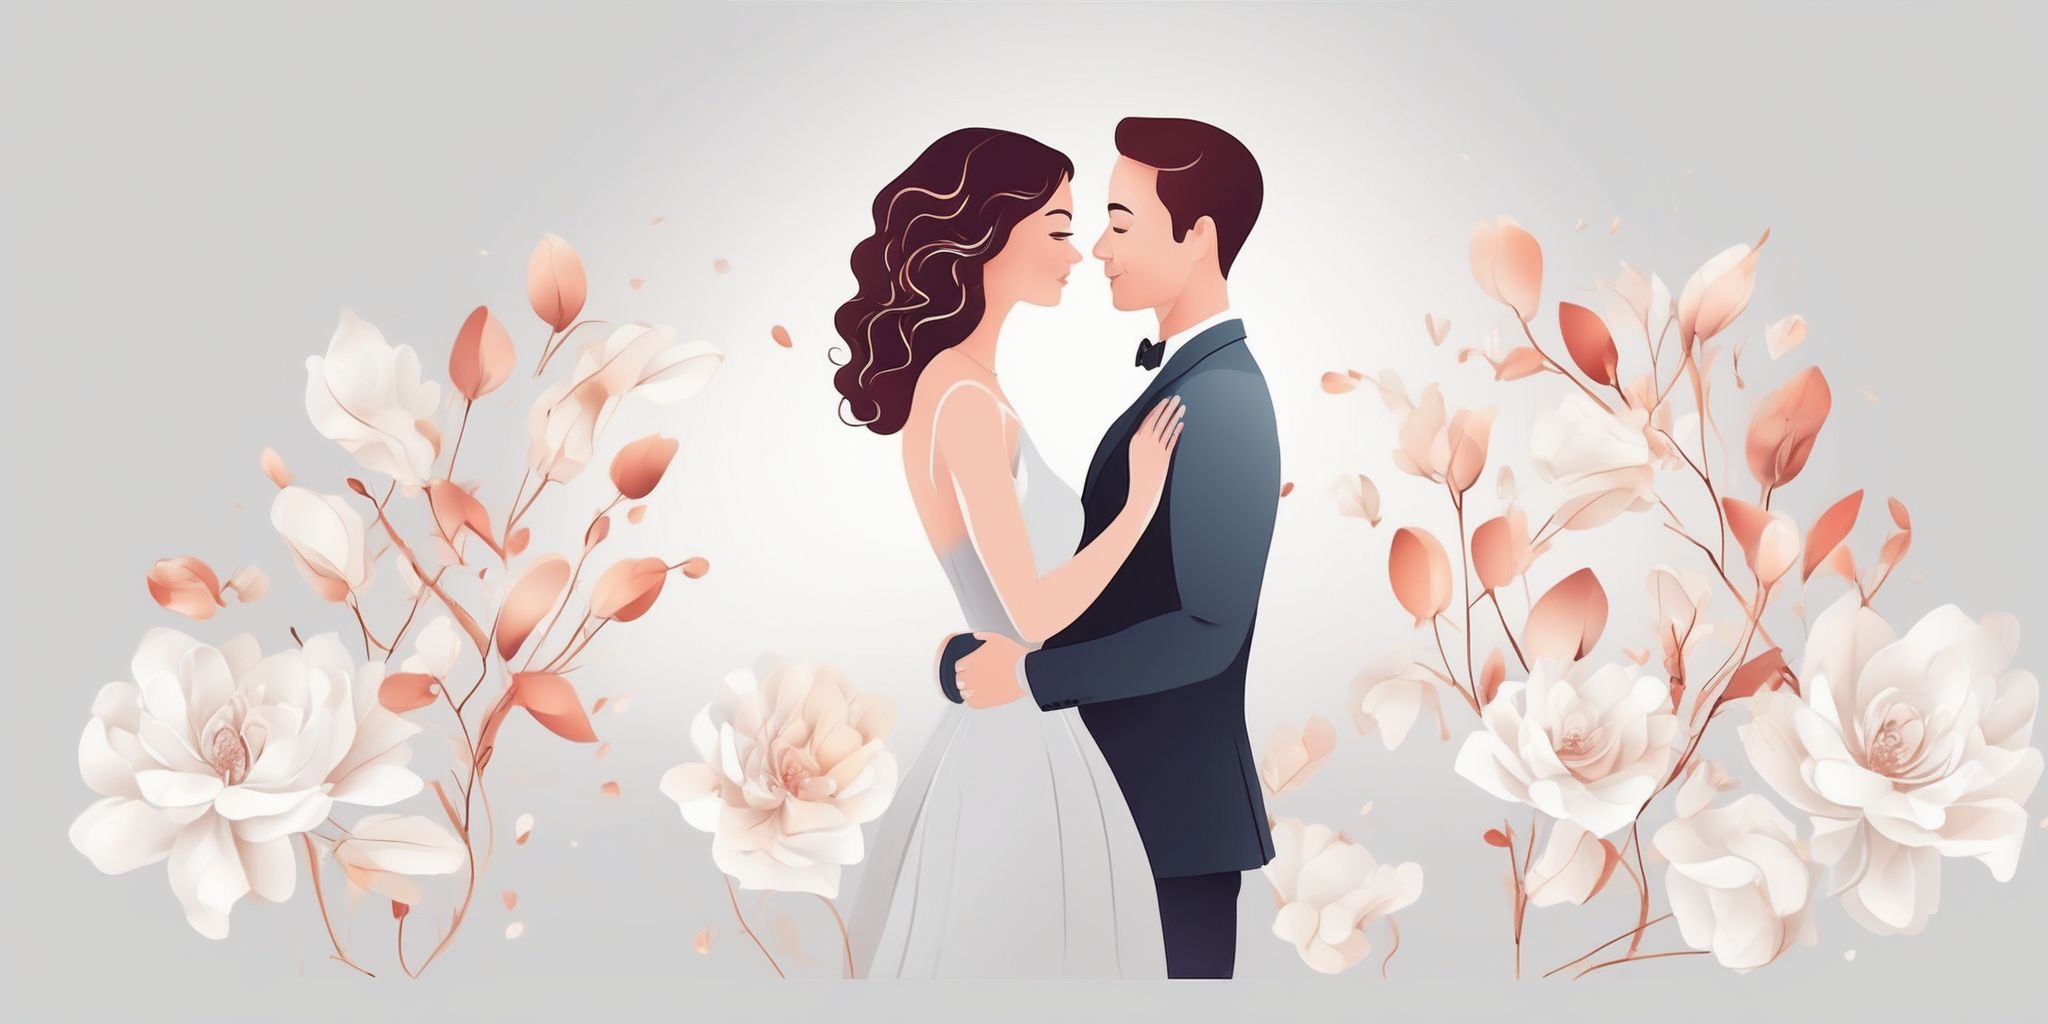 Engagement in illustration style with gradients and white background